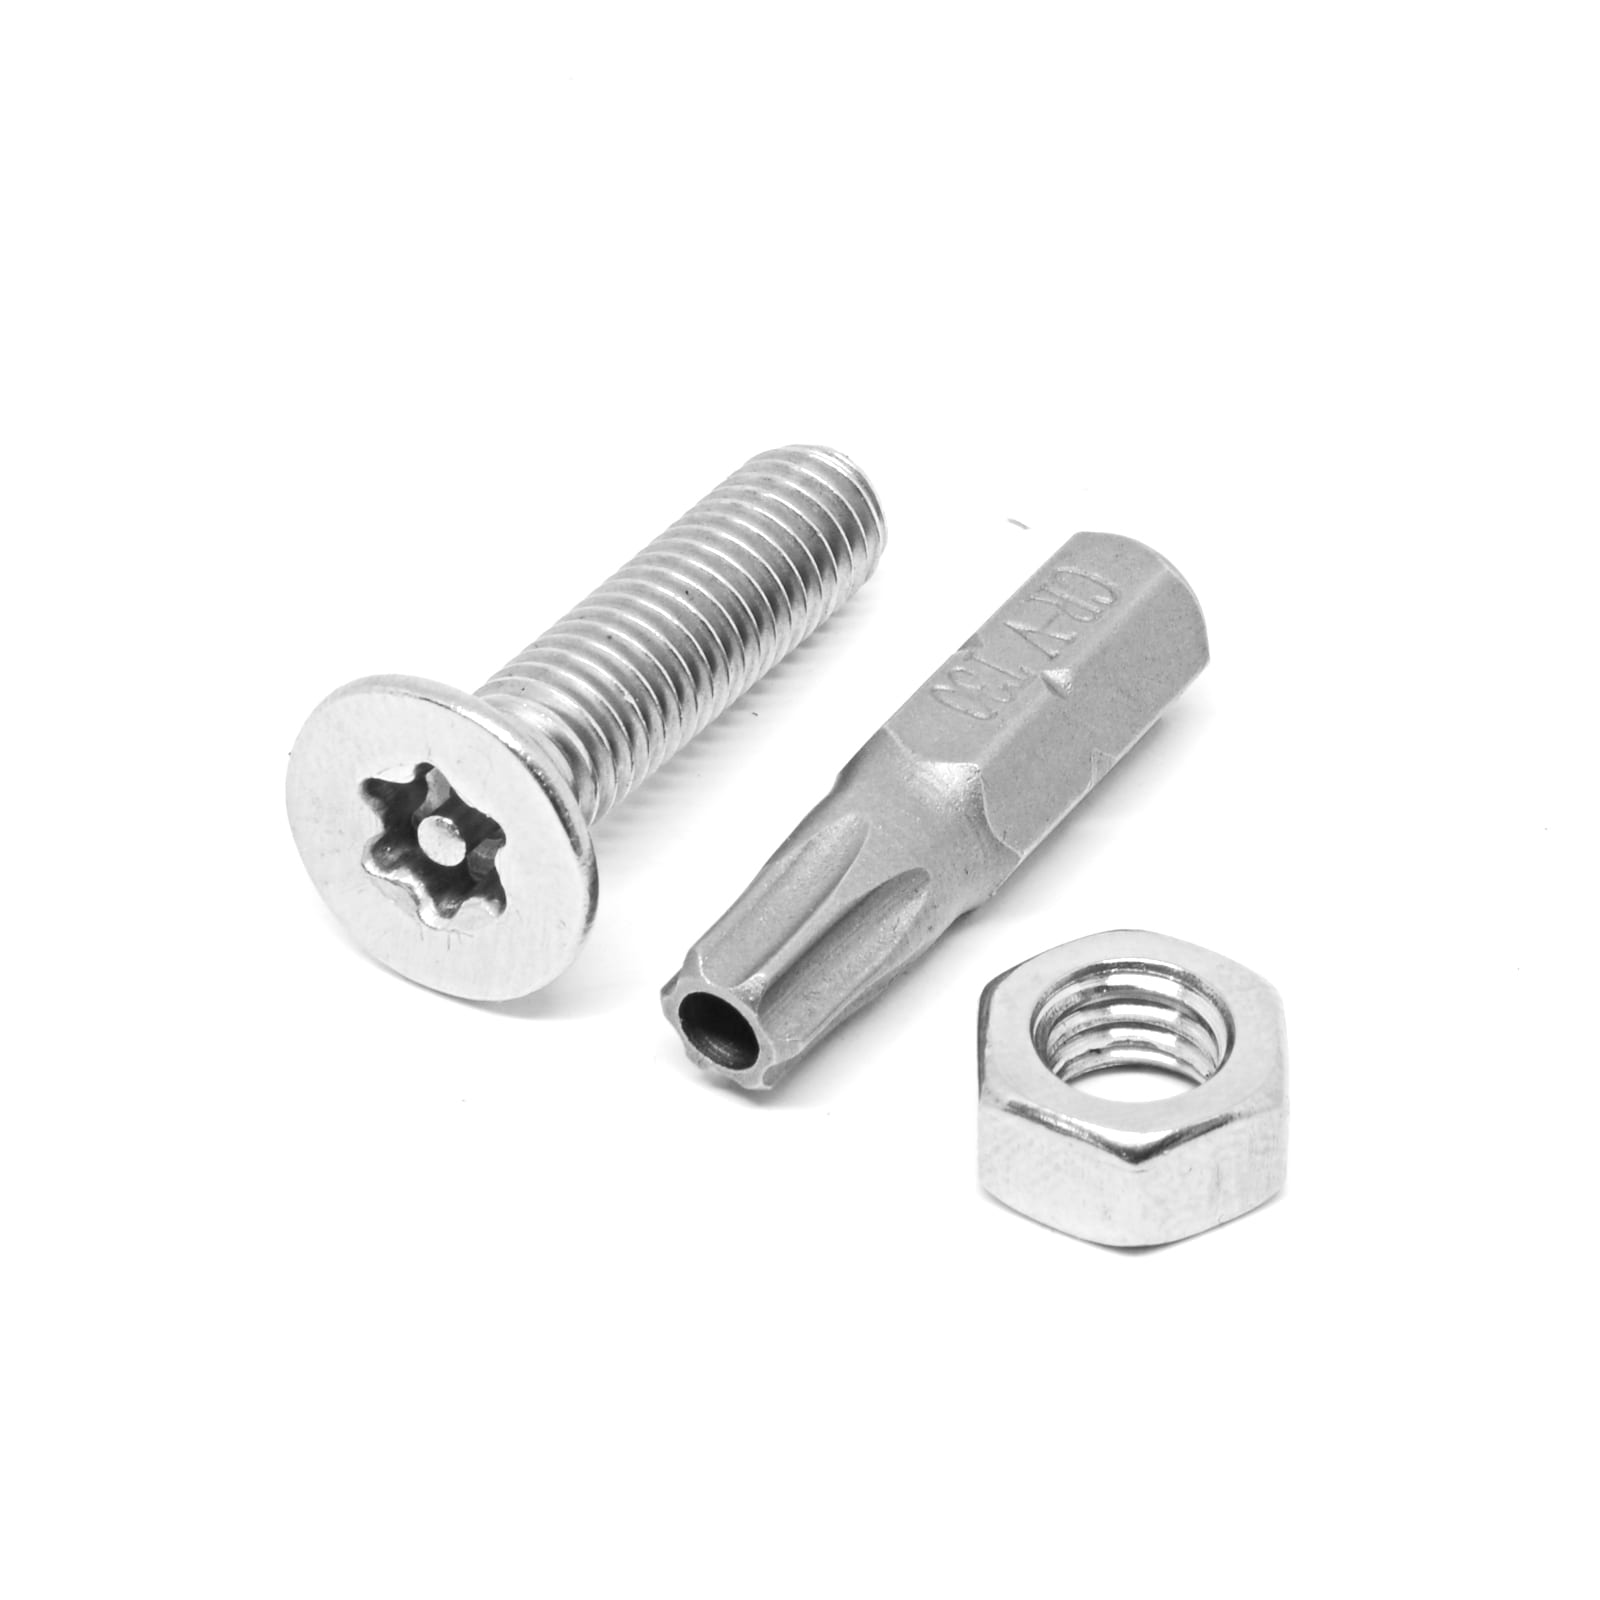 SECURITY BOLT M8 - 1.25 x 35 STAINLESS STEEL FLAT HEAD